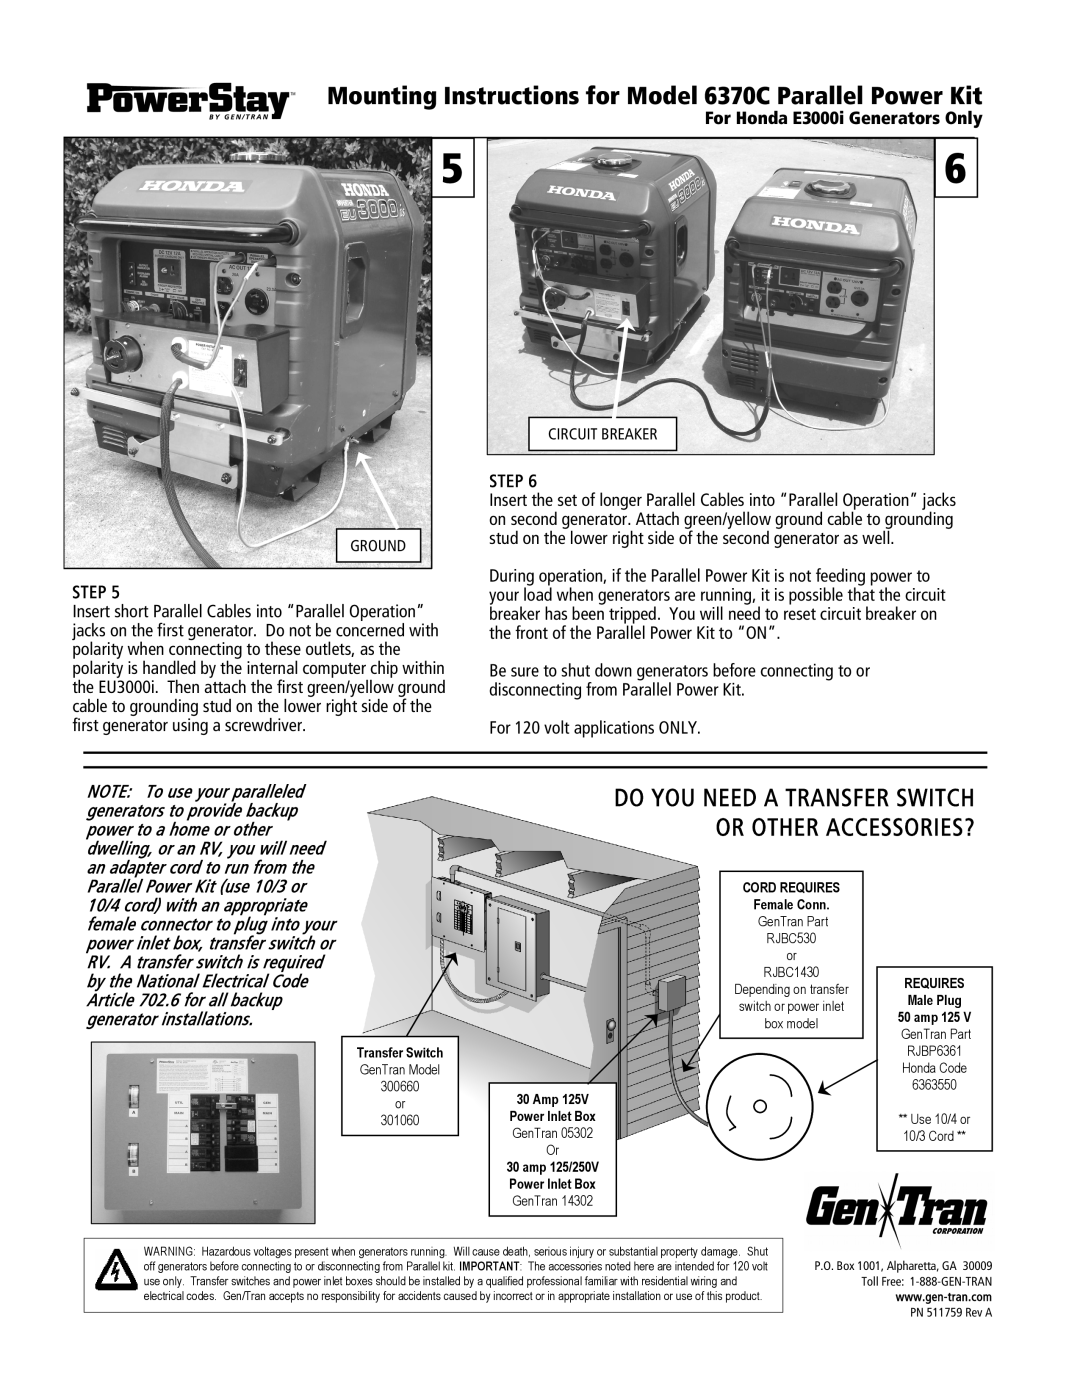 GenTran 6370C manual For Honda E3000i Generators Only, Step, the front of the Parallel Power Kit to “ON” 